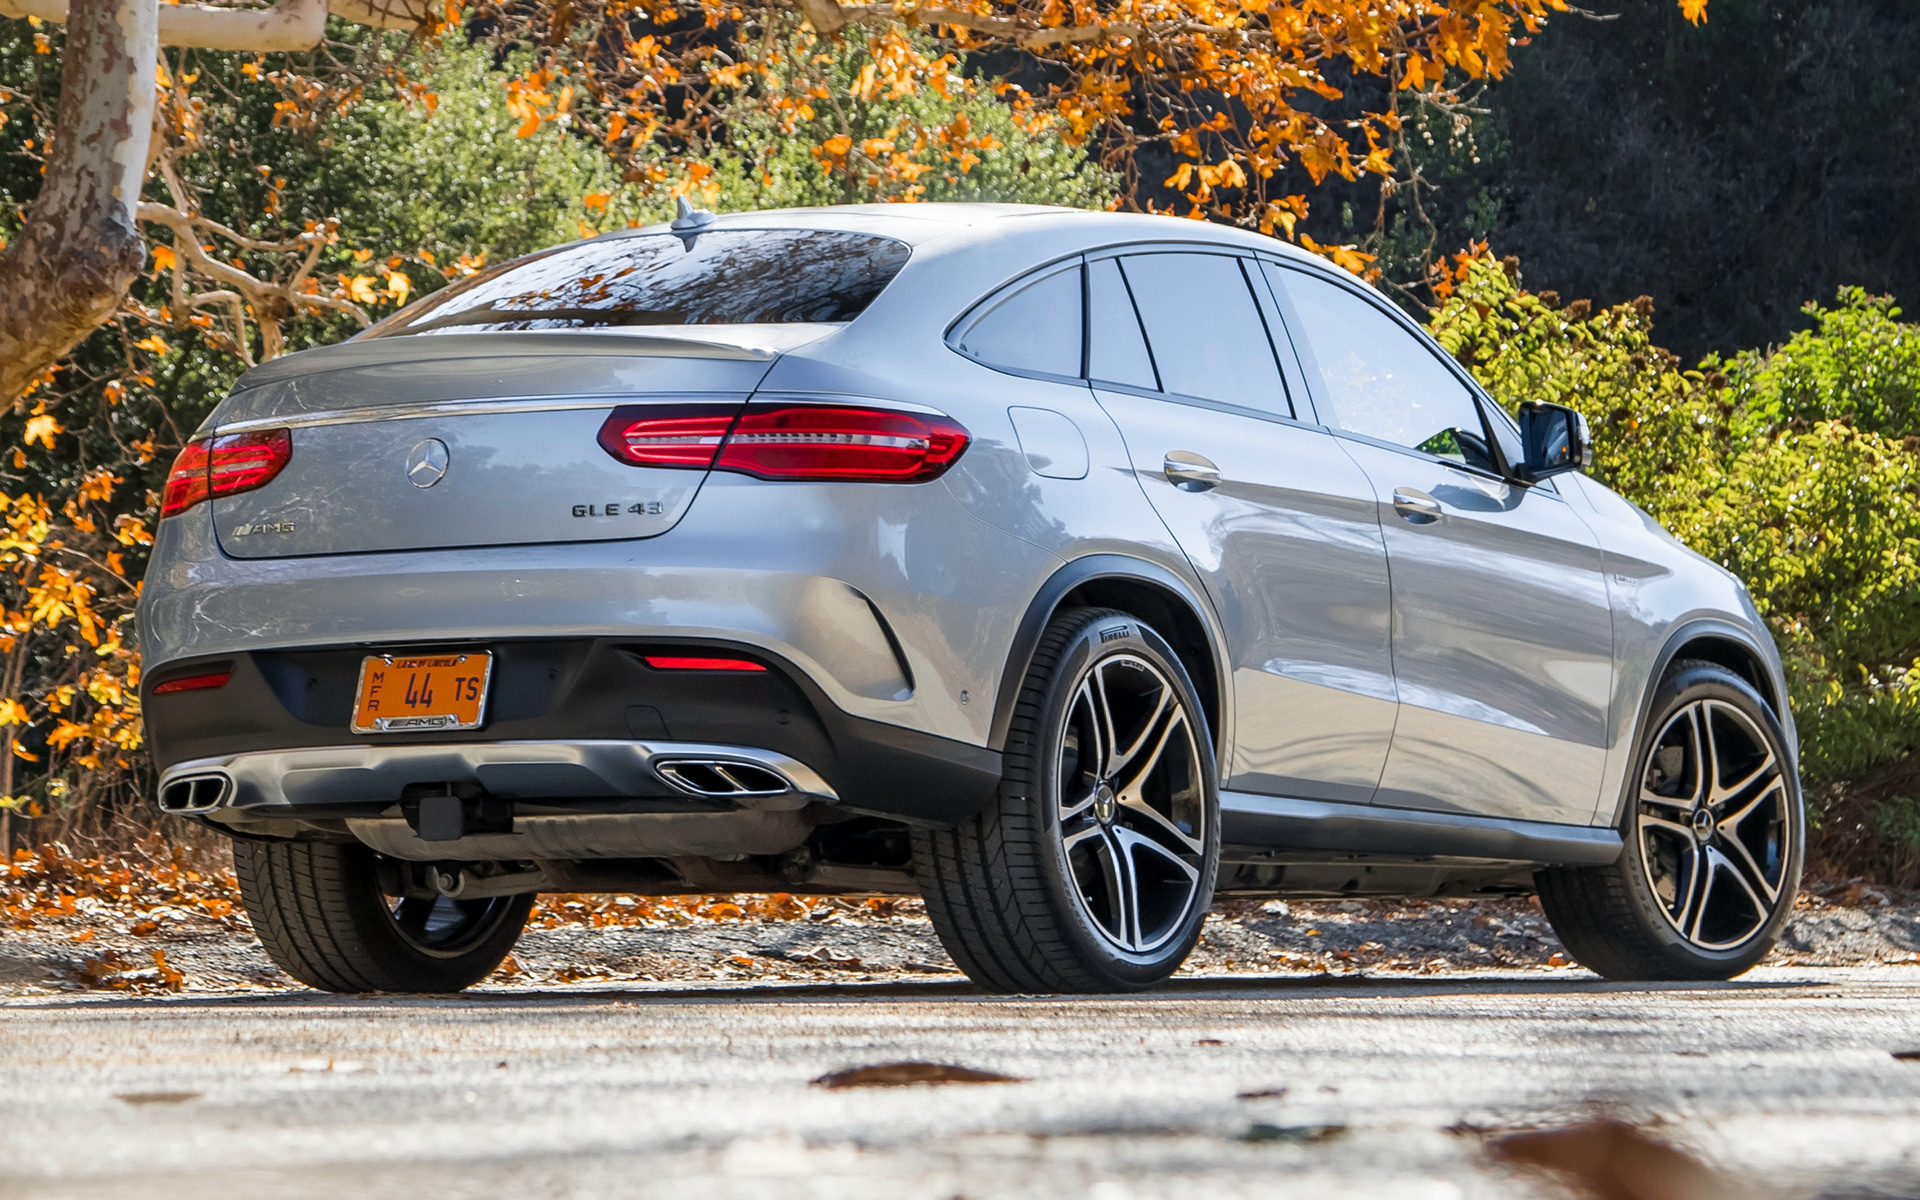 2017 Mercedes-AMG GLE 43 Coupe (US) - Wallpapers and HD Images | Car Pixel